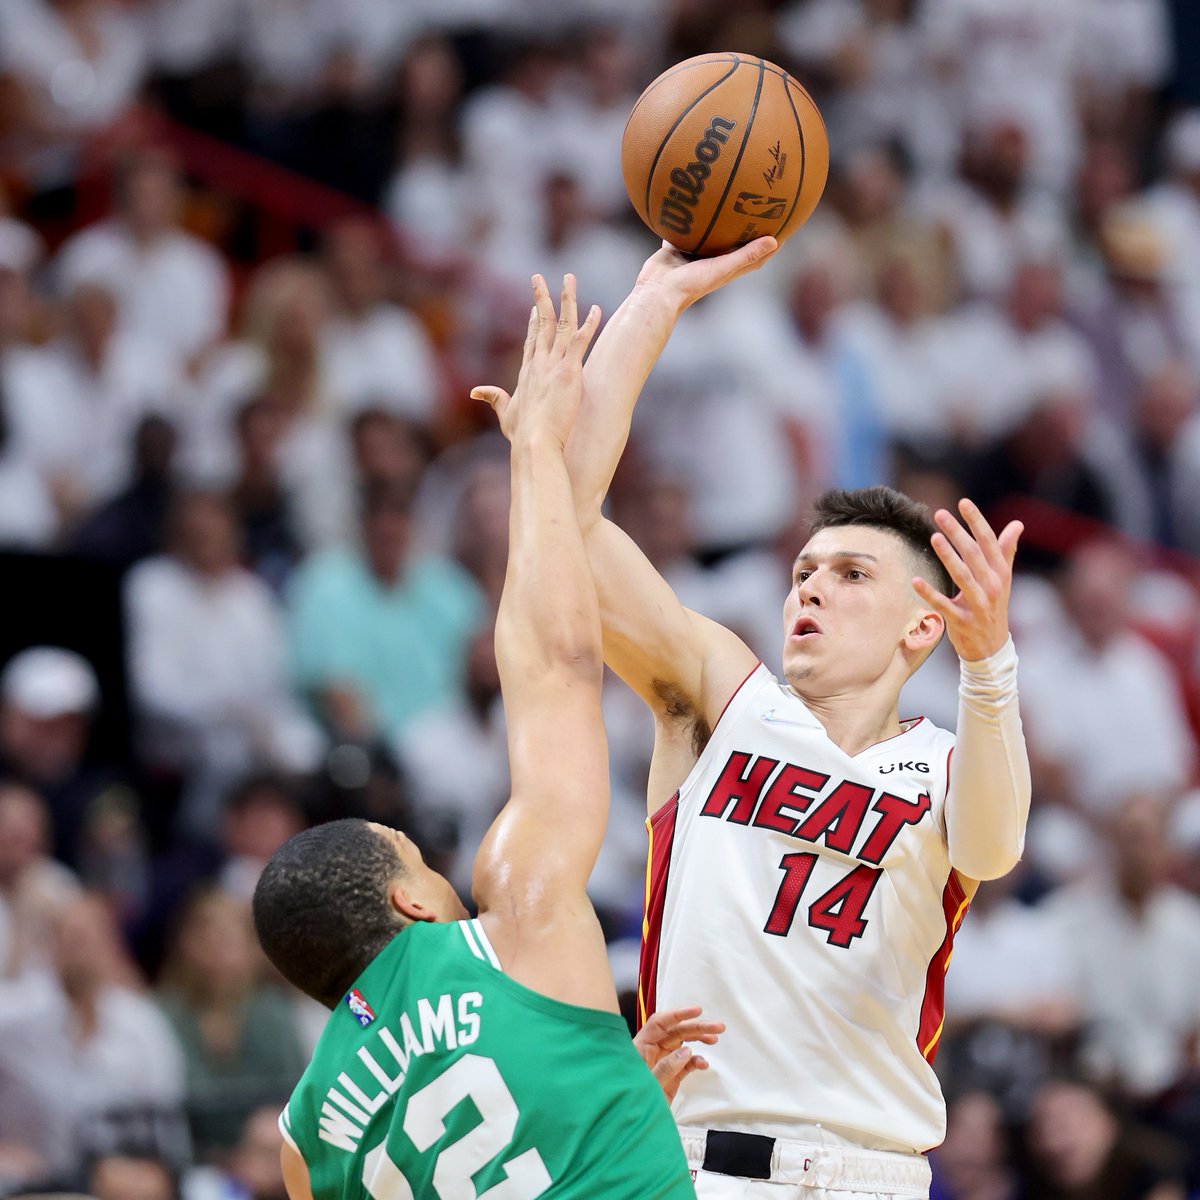 15 points off the bench in the first half for Tyler Herro #HEATCulture #KiaSixth

🏀 15 PTS, 4 REB, 3 AST